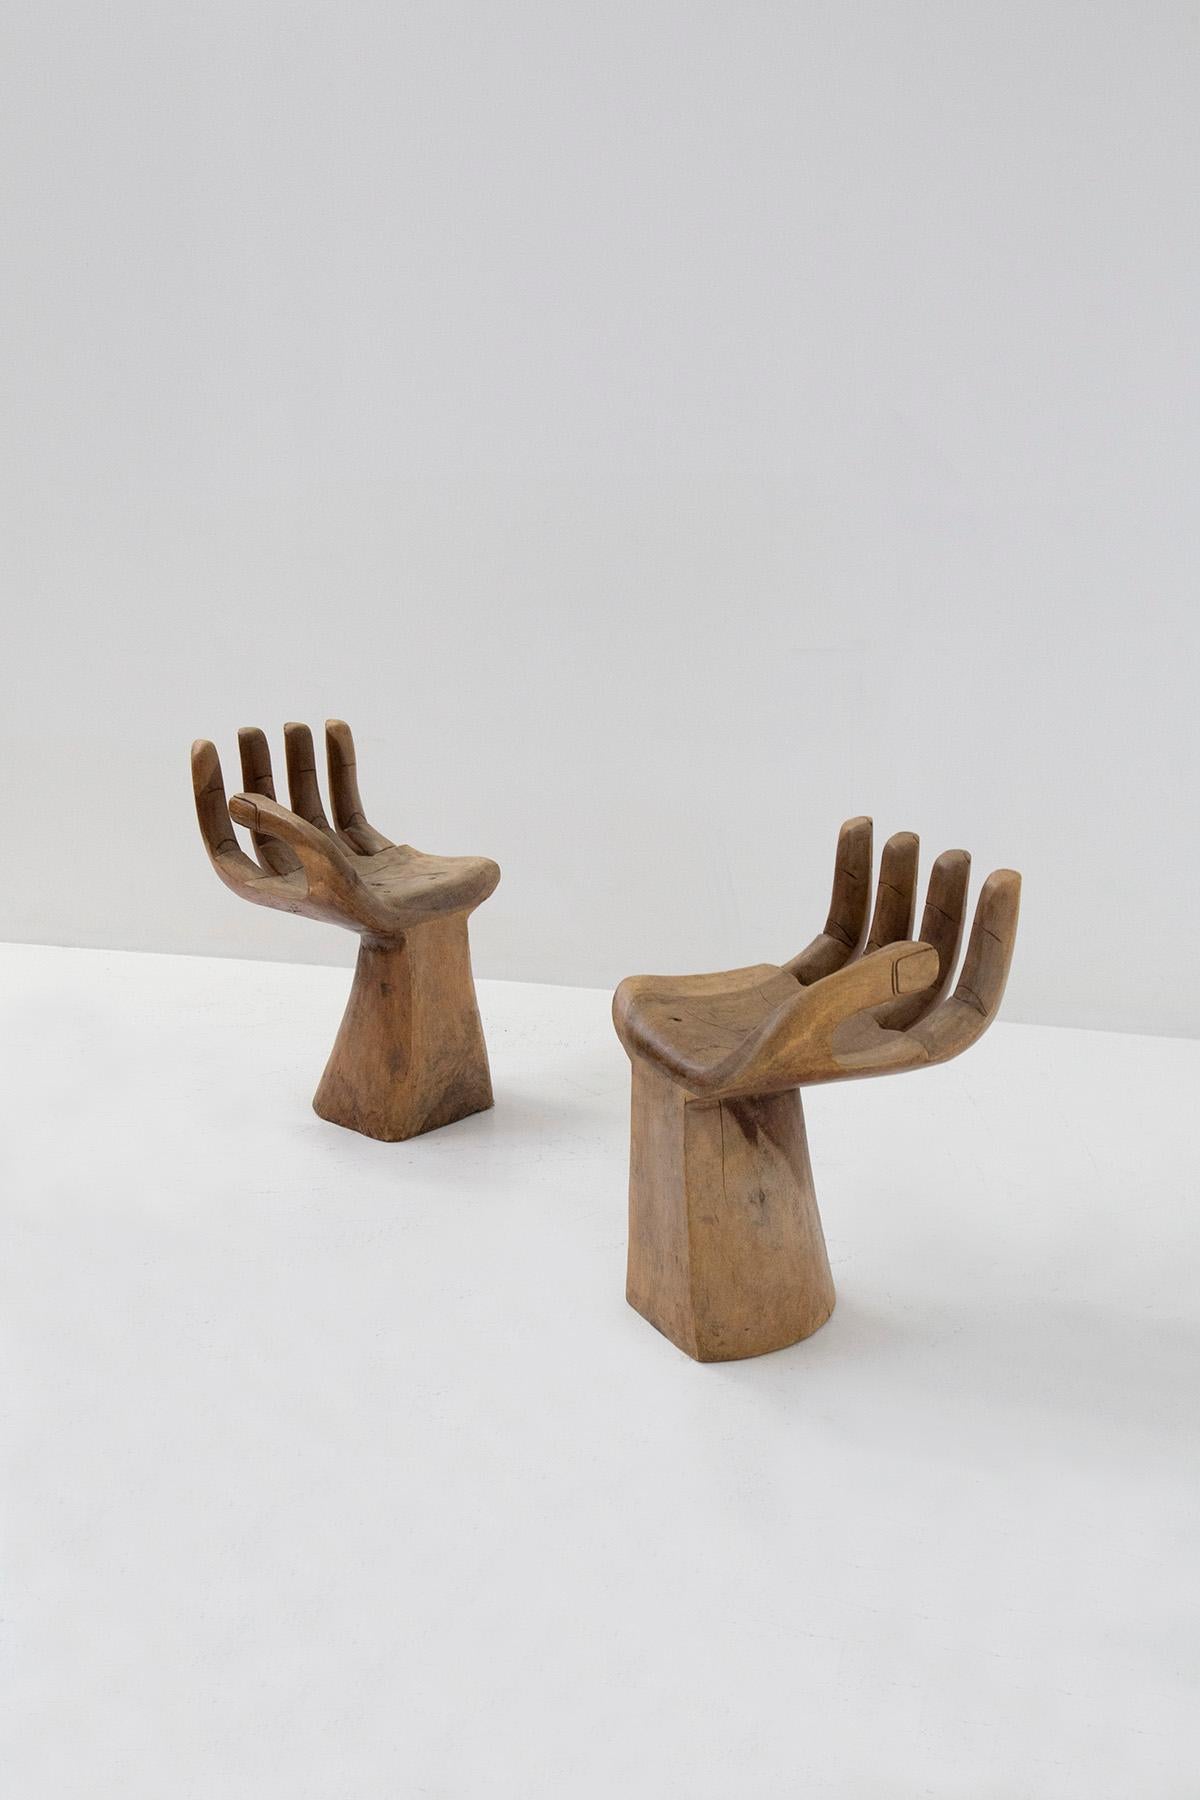 Eccentric pair of hand-shaped chairs made entirely of wood from the 1980s. The pair of chairs are in the style of Pedro Friedeberg, as in his creation these pair of chairs take up the design of hands creating an eccentric seat. The seat is carved